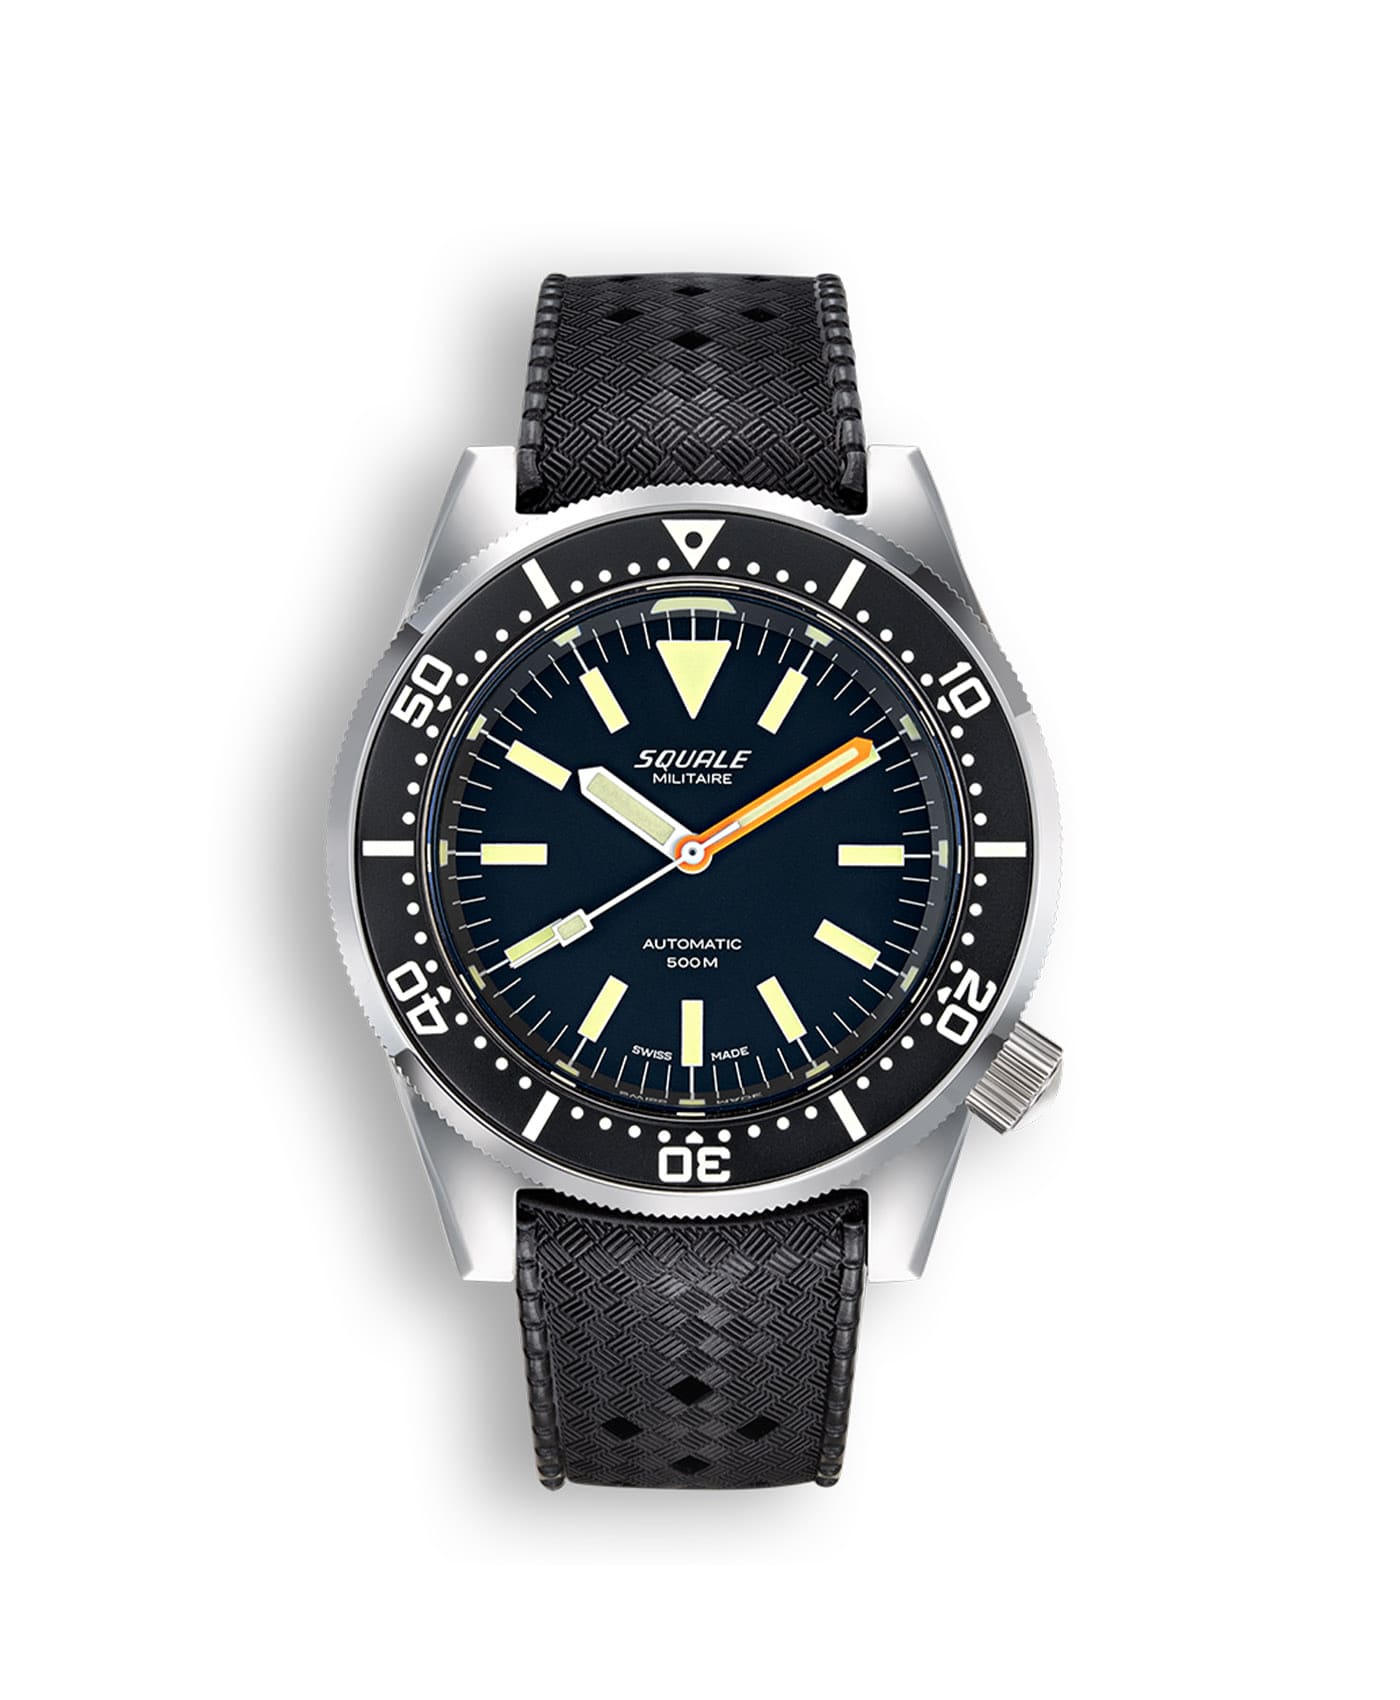 Squale - 1521 Black Militaire - Polished - Rubber - 1521MIL.HT-min